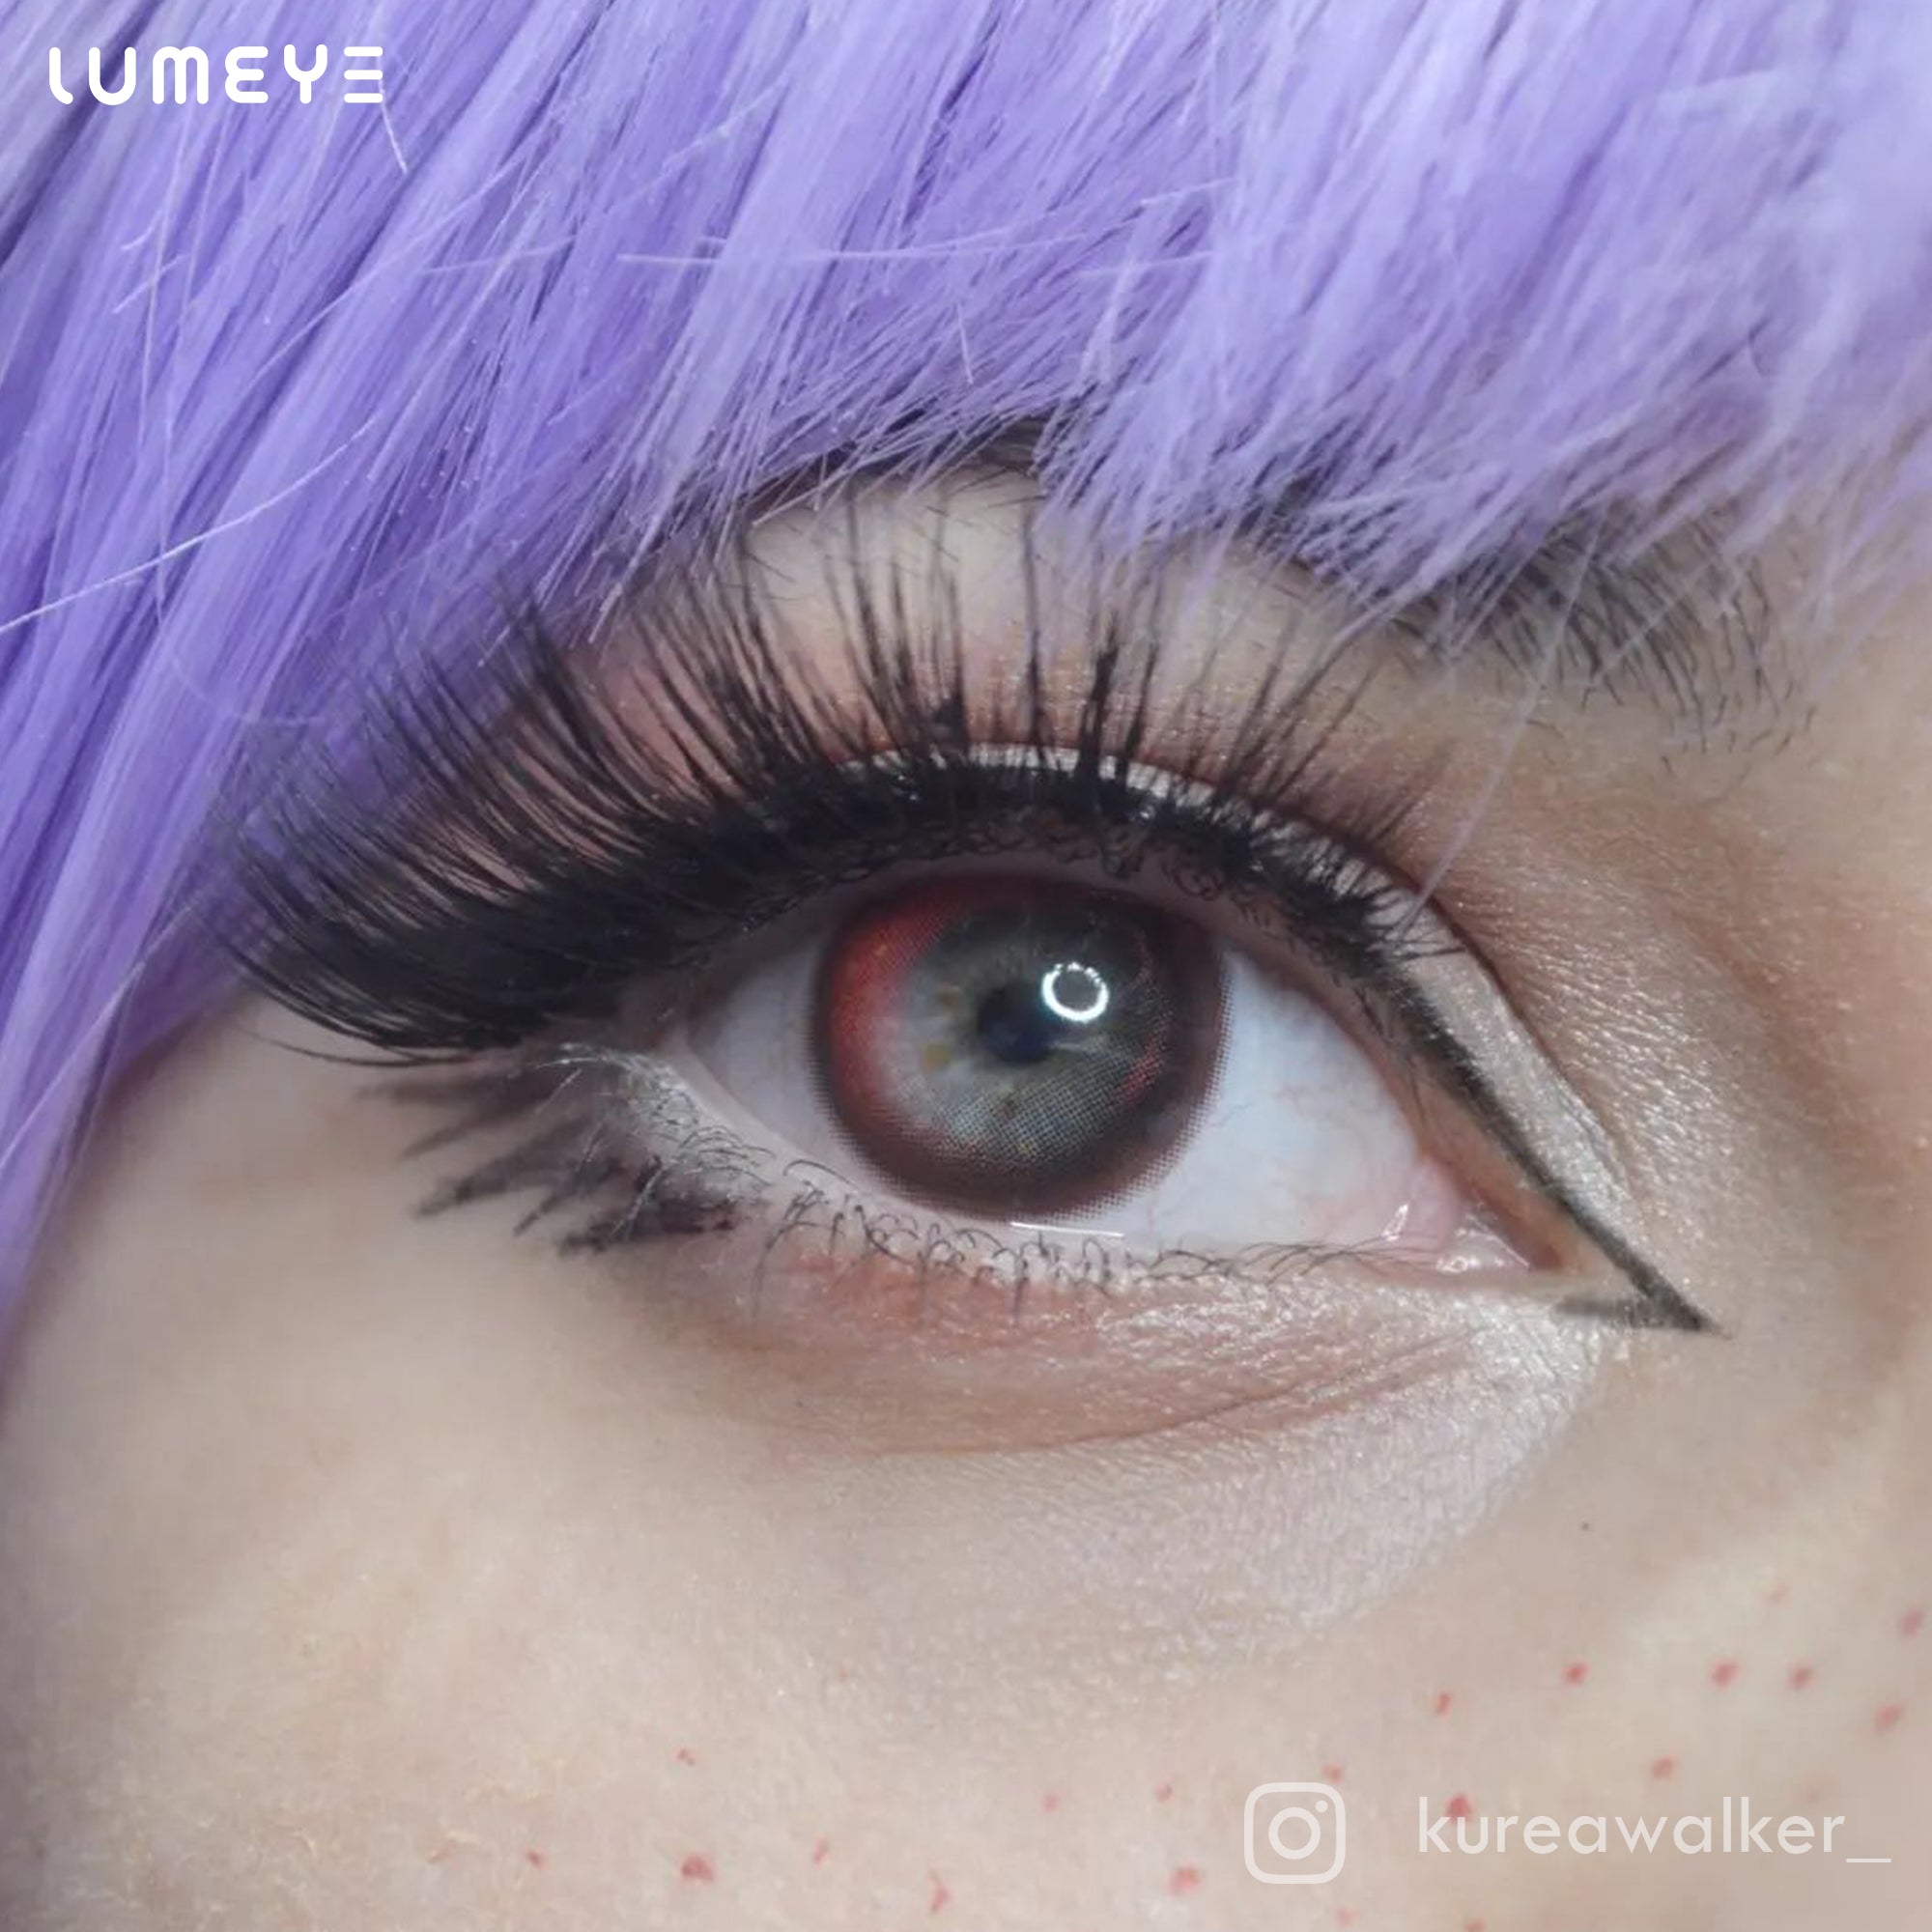 Best COLORED CONTACTS - LUMEYE Crazy Red Colored Contact Lenses - LUMEYE